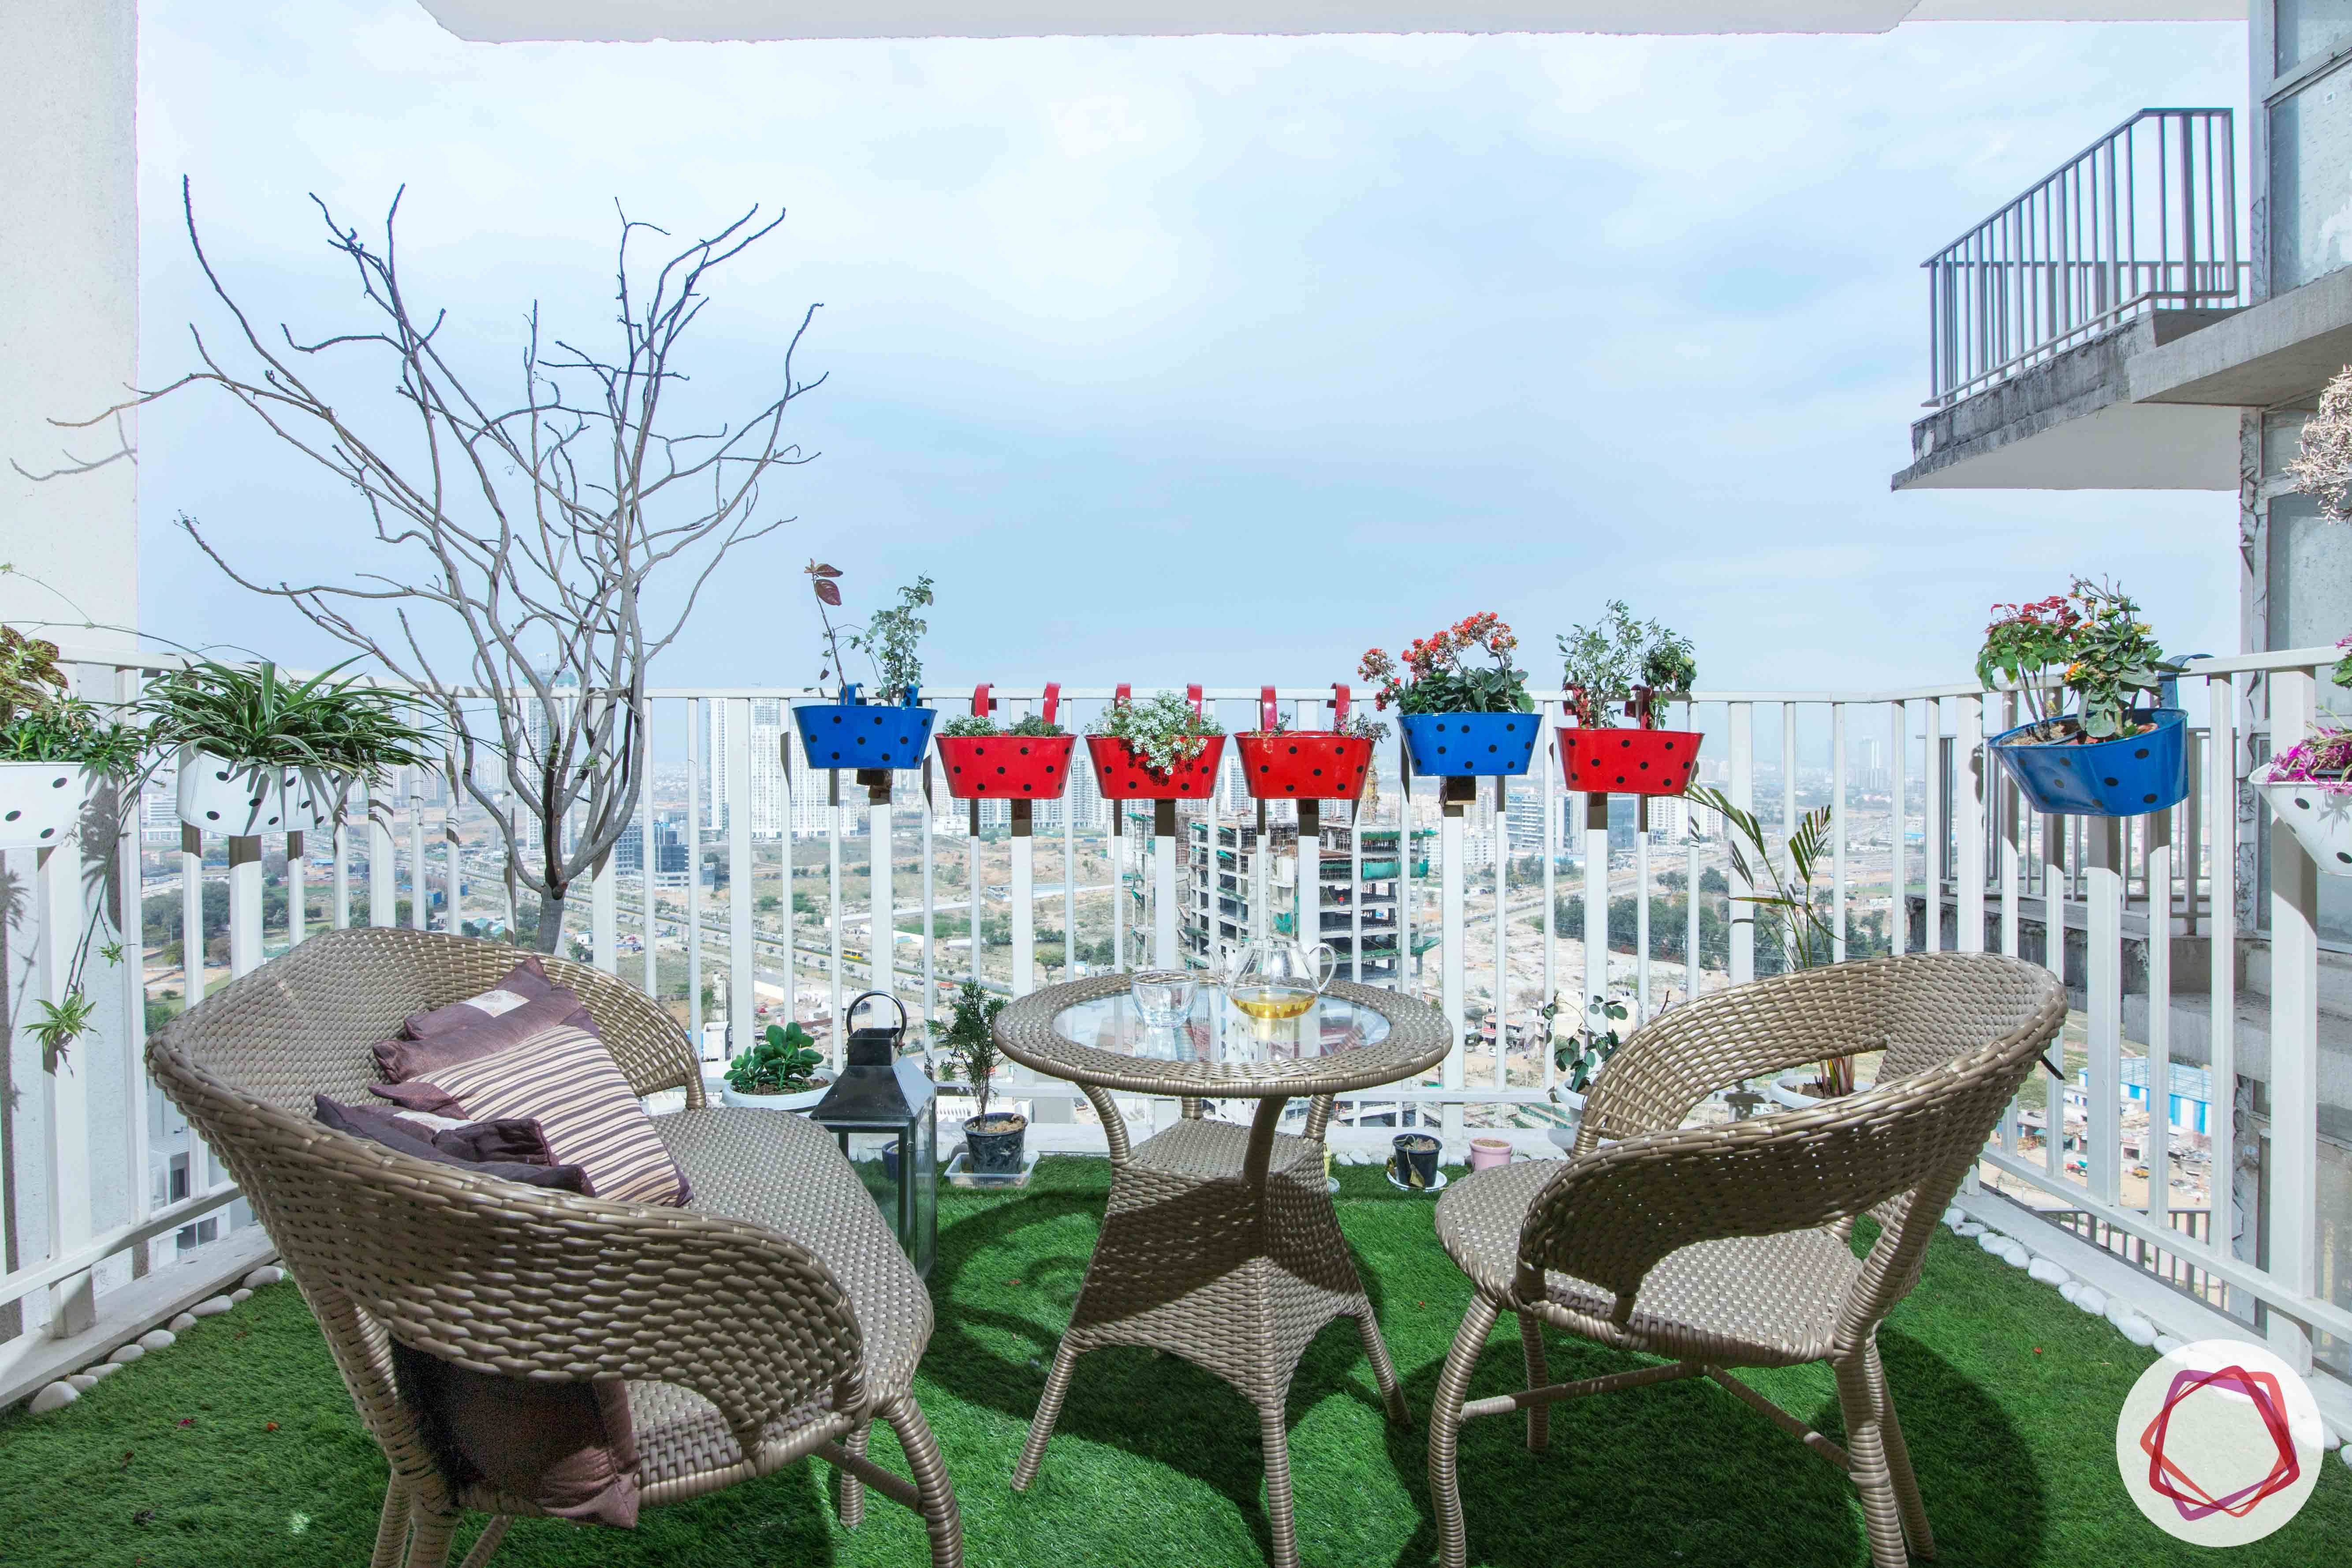 ireo victory valley-balcony-cane furniture-colourful planters